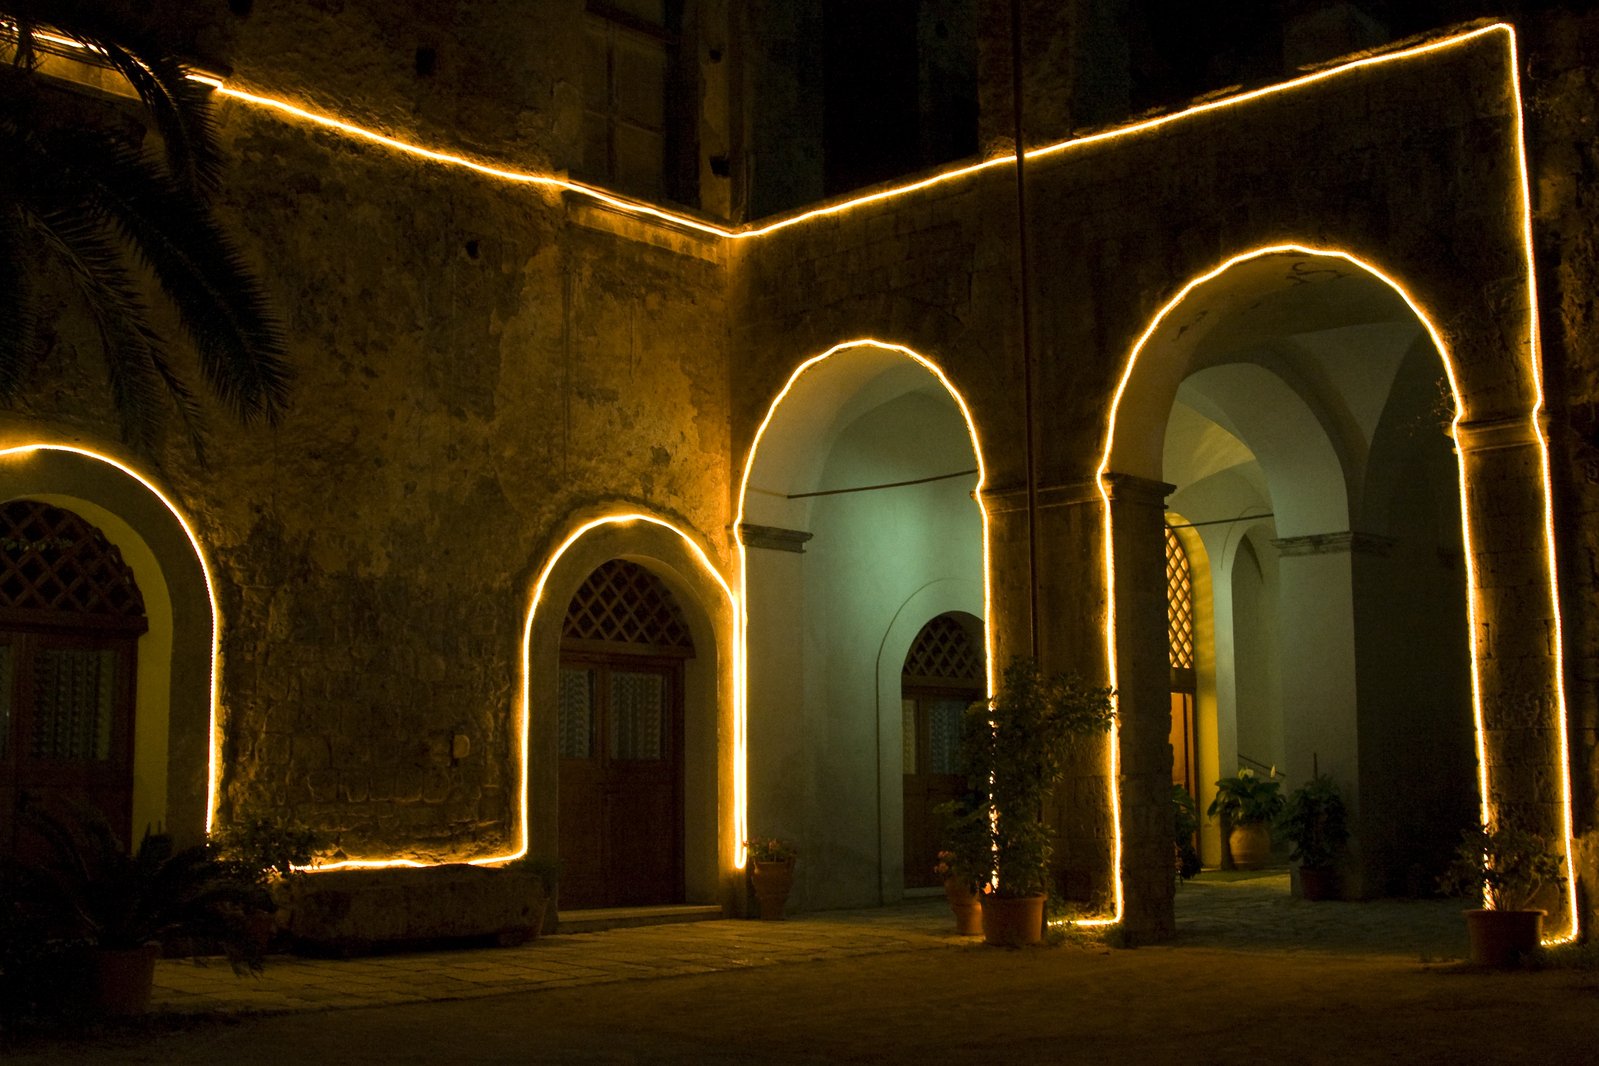 an archway with arches with bright lights and some palm trees